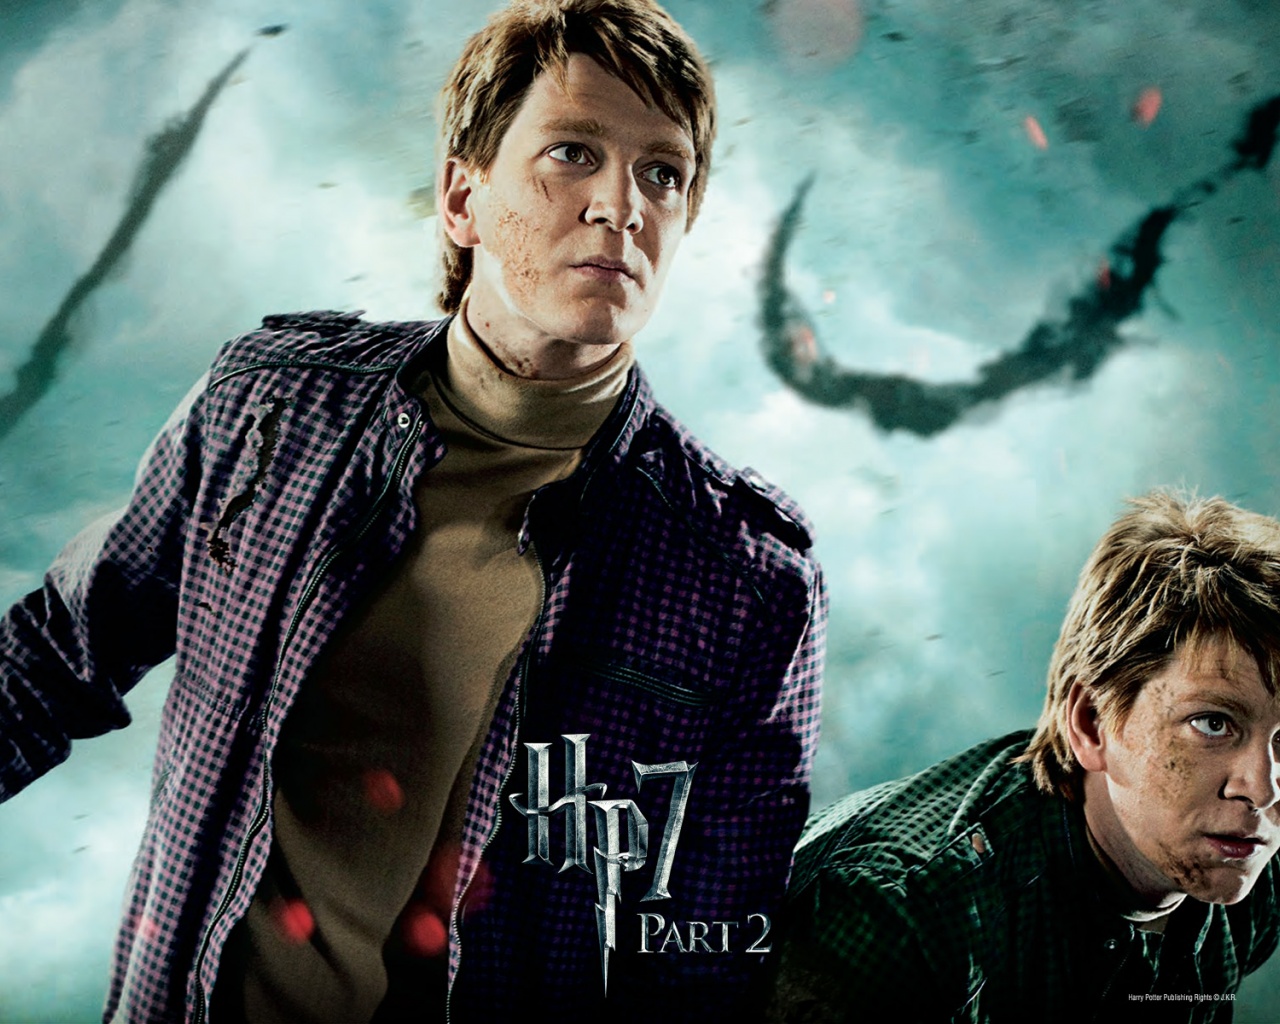 Harry Potter And The Deathly Hallows Twins